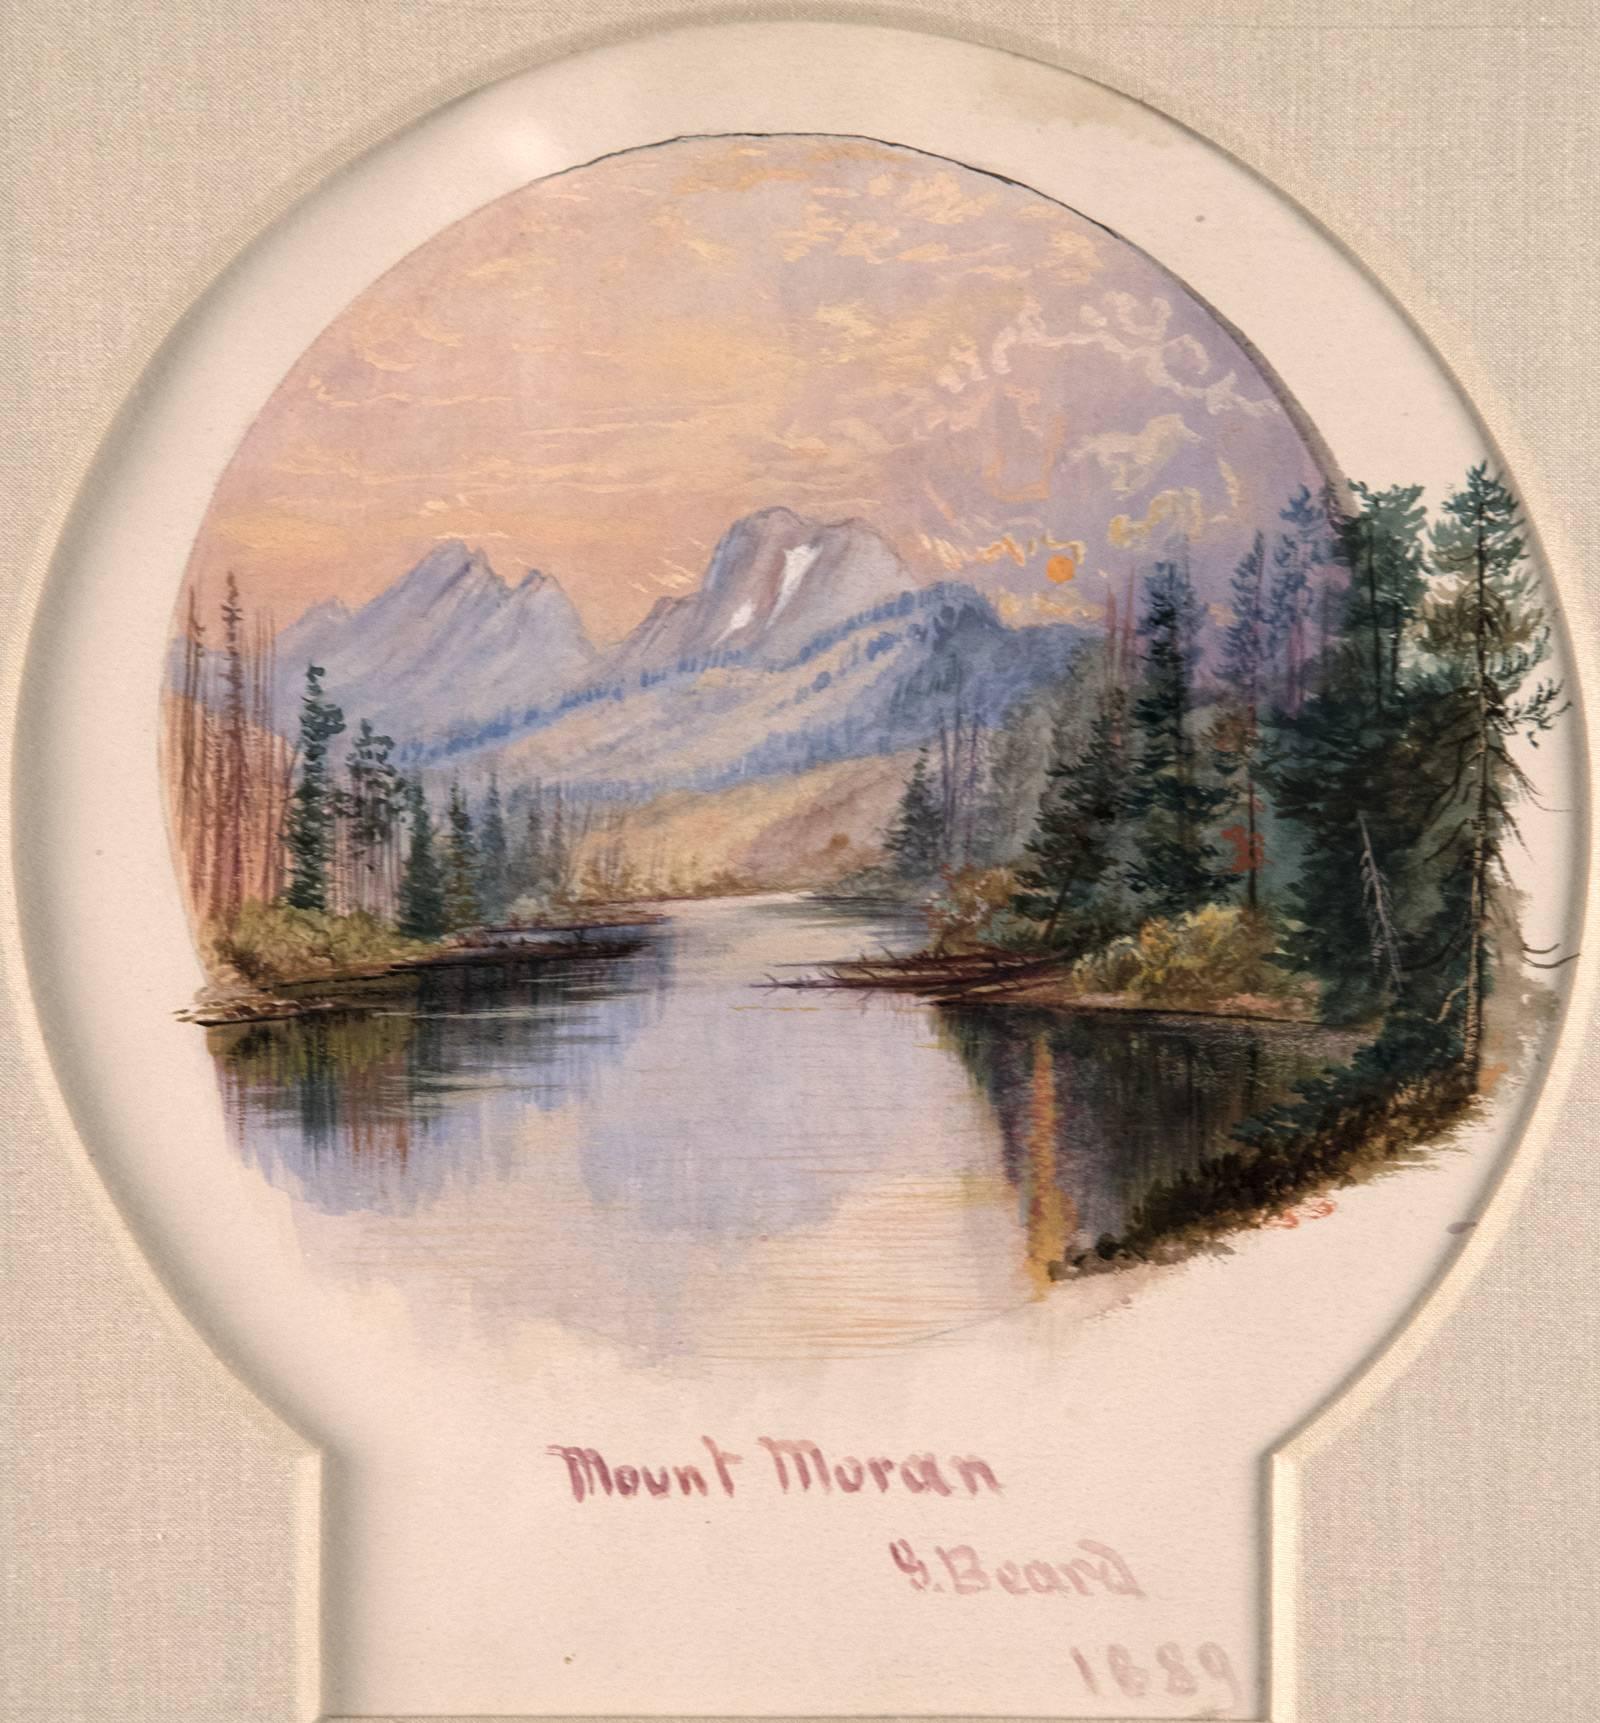 This 19th century watercolor on paper depicts the grand form of Mount Moran, in Jackson Hole, Wyoming. The viewer is drawn straight into the centre of the composition and lead across the still waters that flow directly to the looming form of the